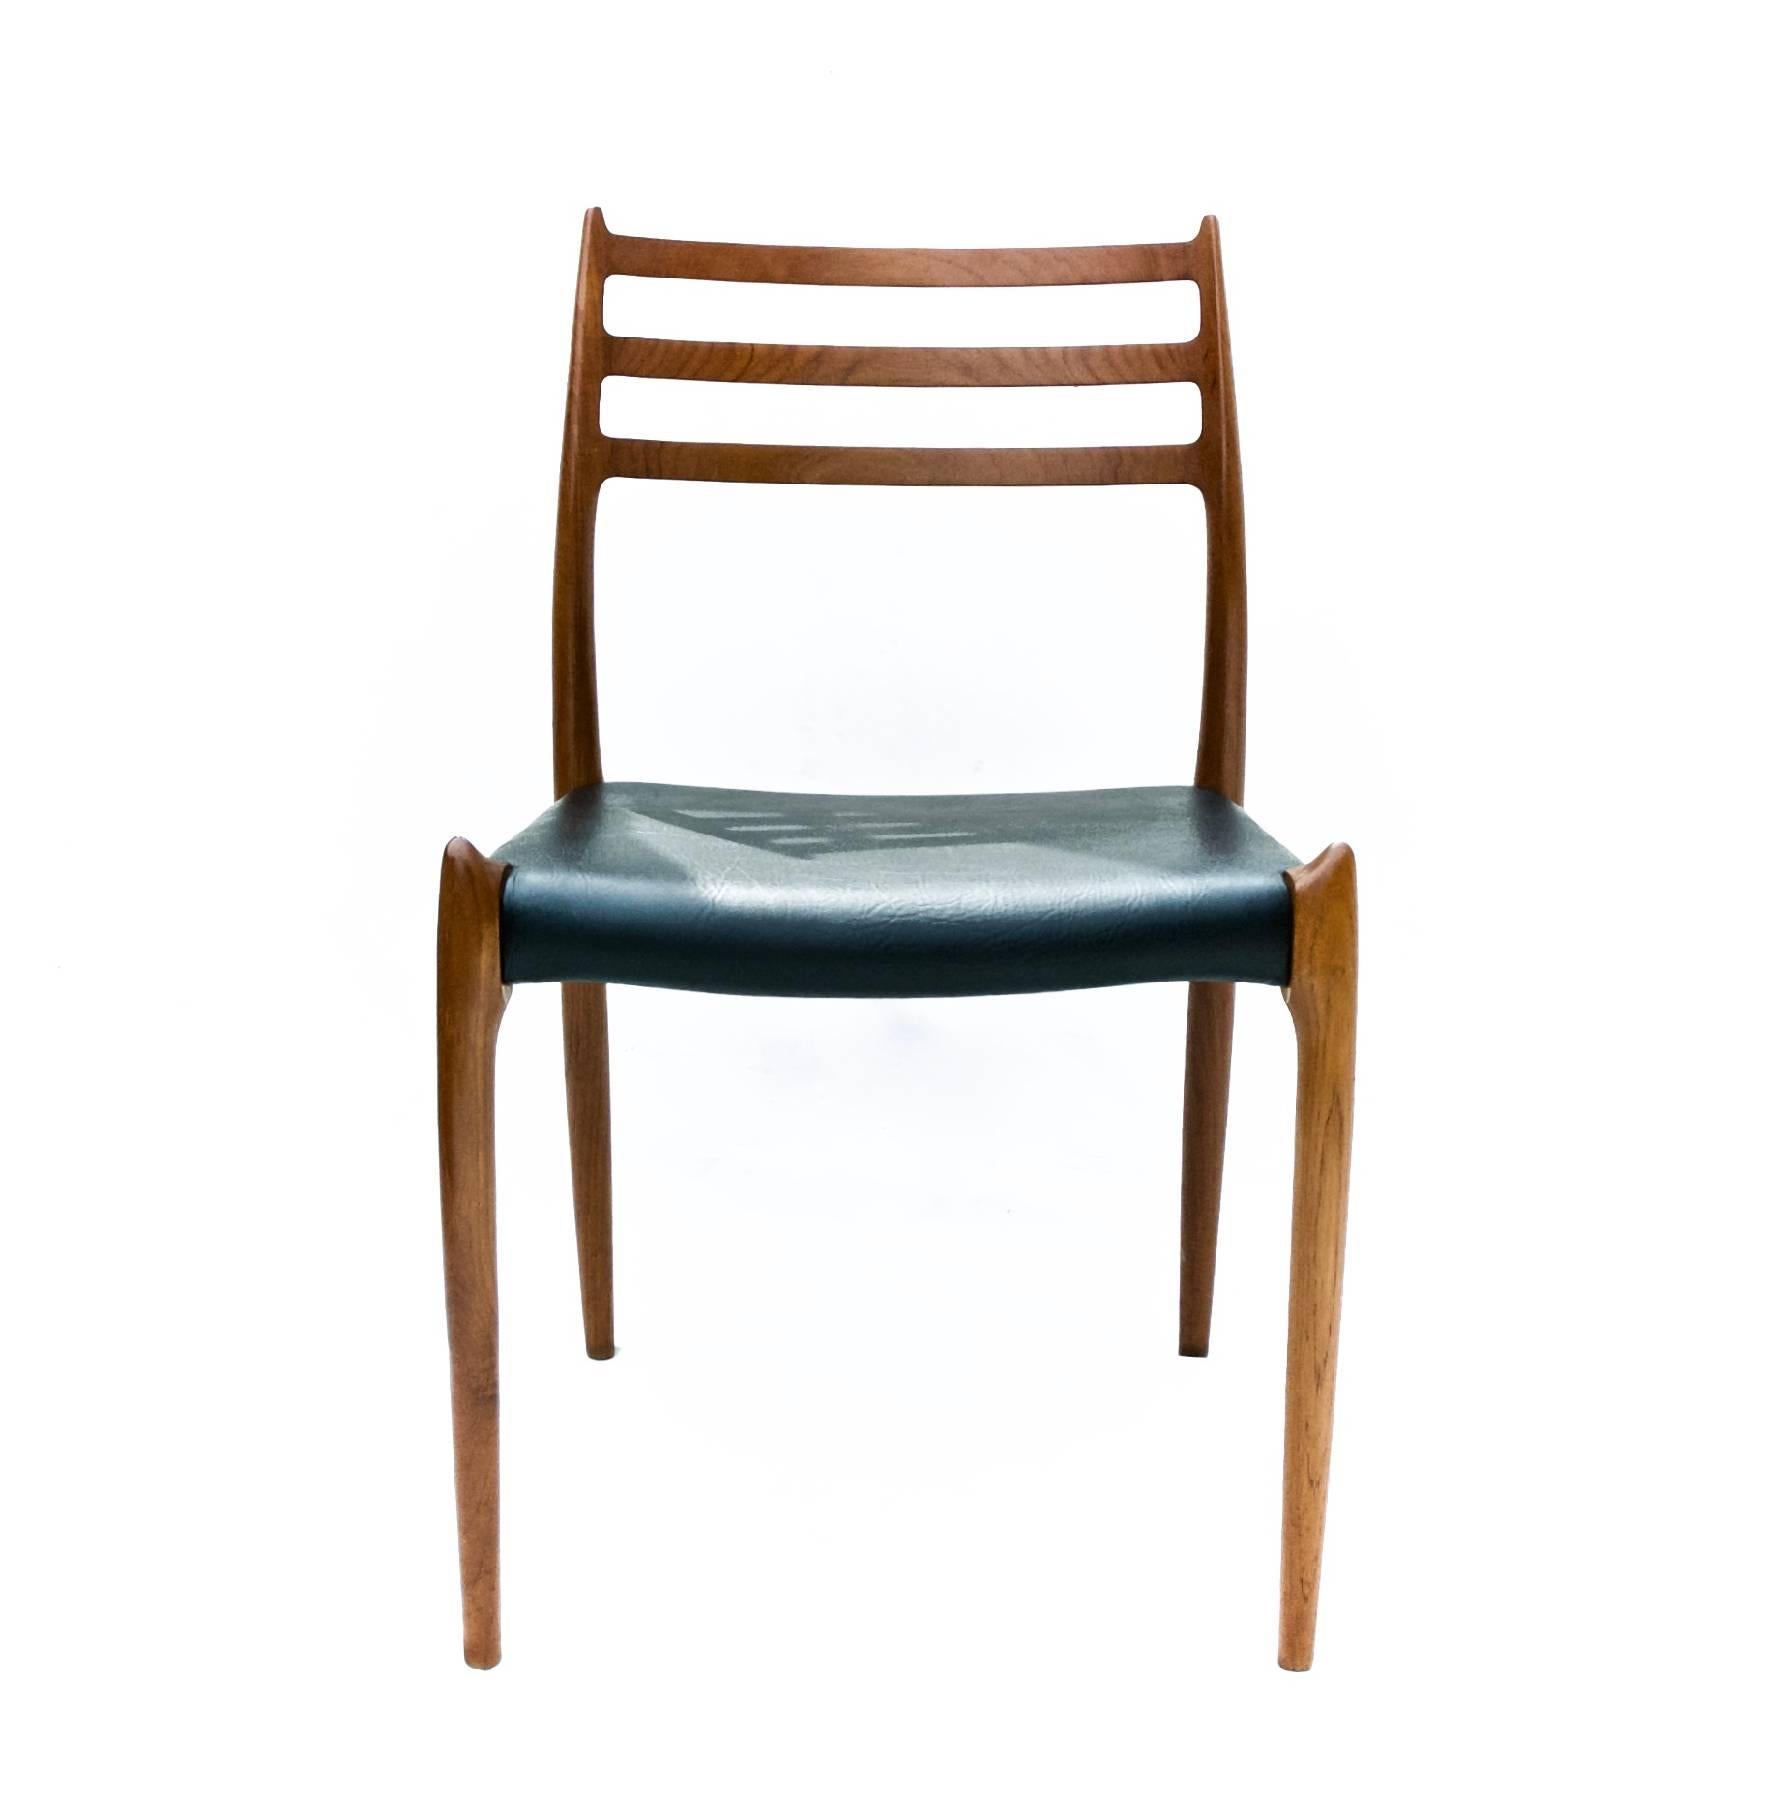 Hand-Crafted N.O. Moller Model 78 Danish Modern Dining Chairs in Teak, Pair For Sale